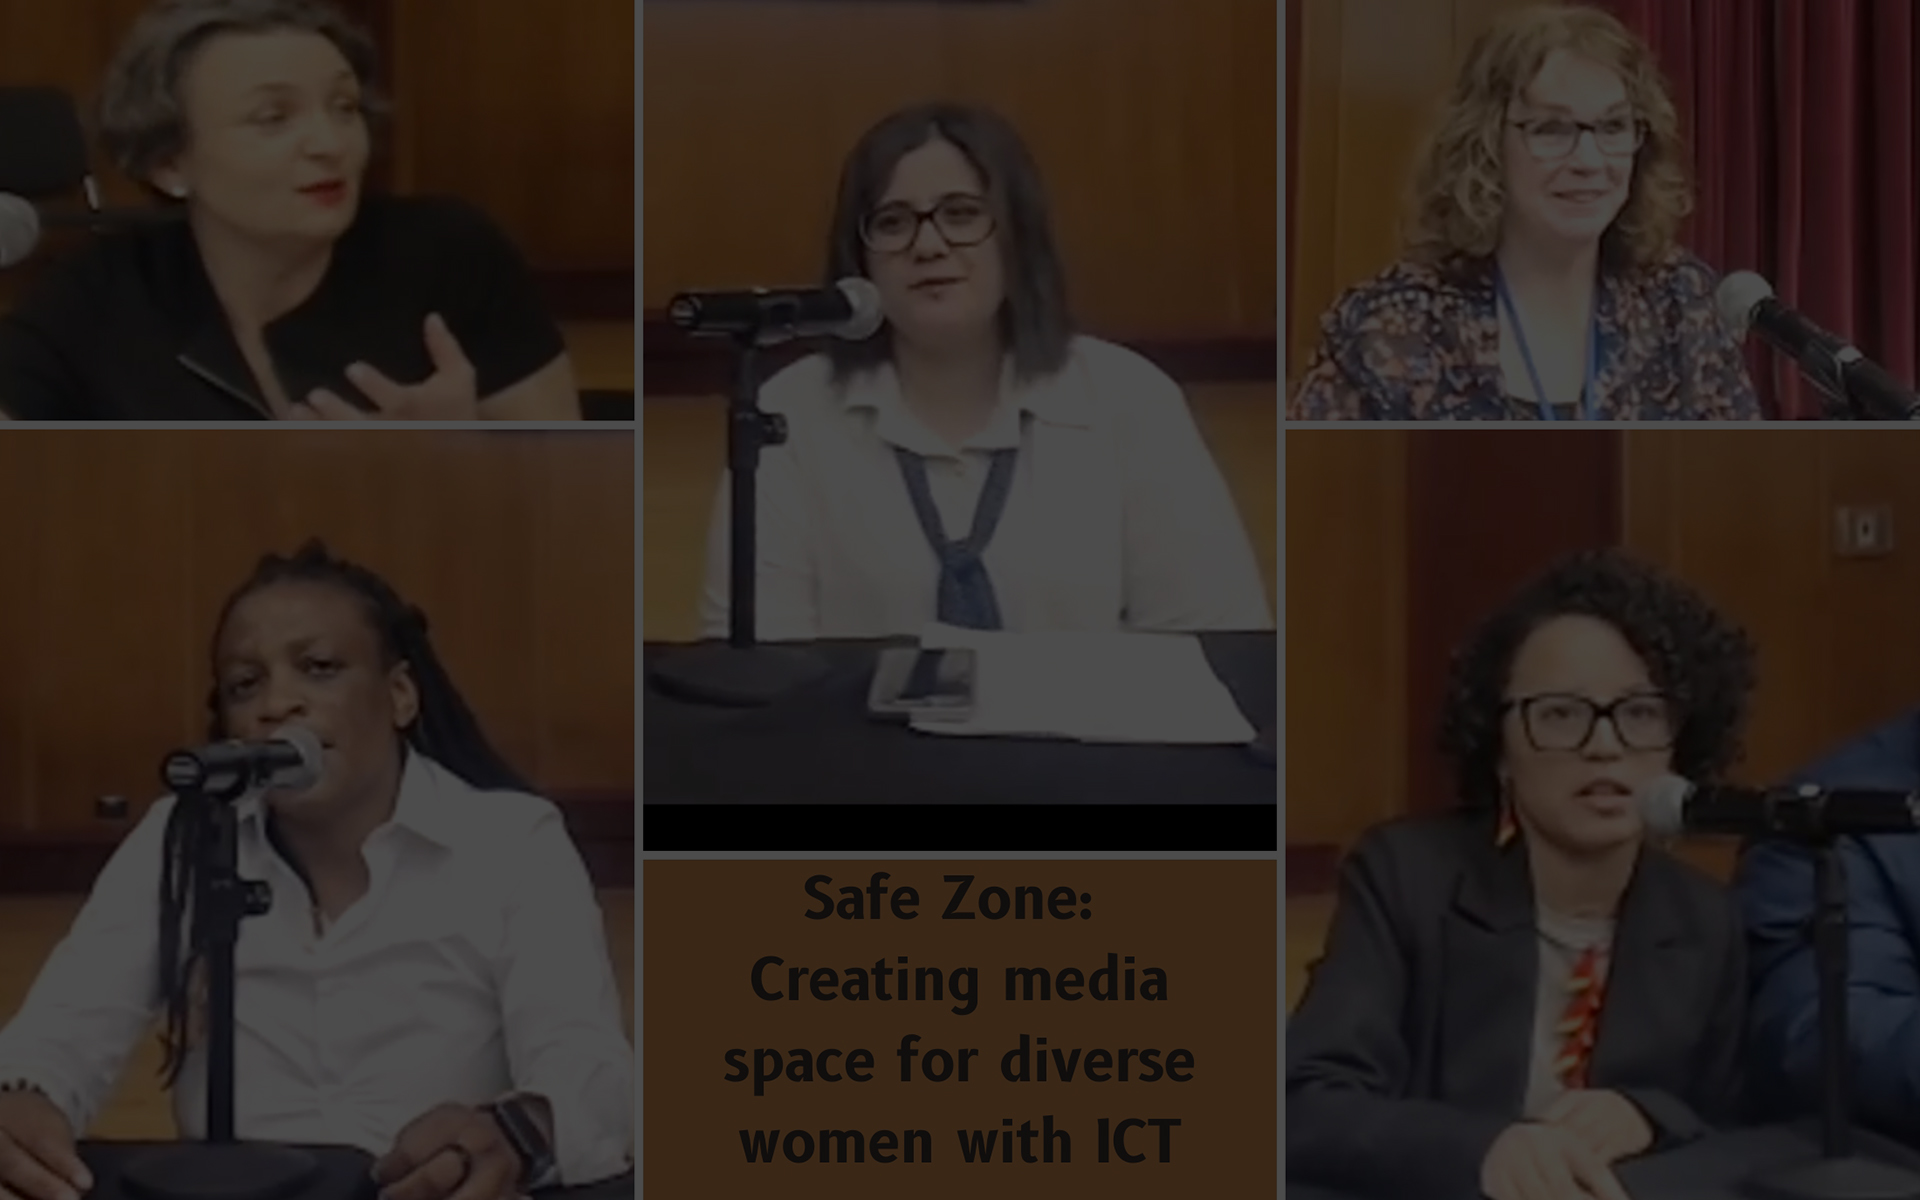 Using new technologies to create <br>safe and diverse media spaces</br>